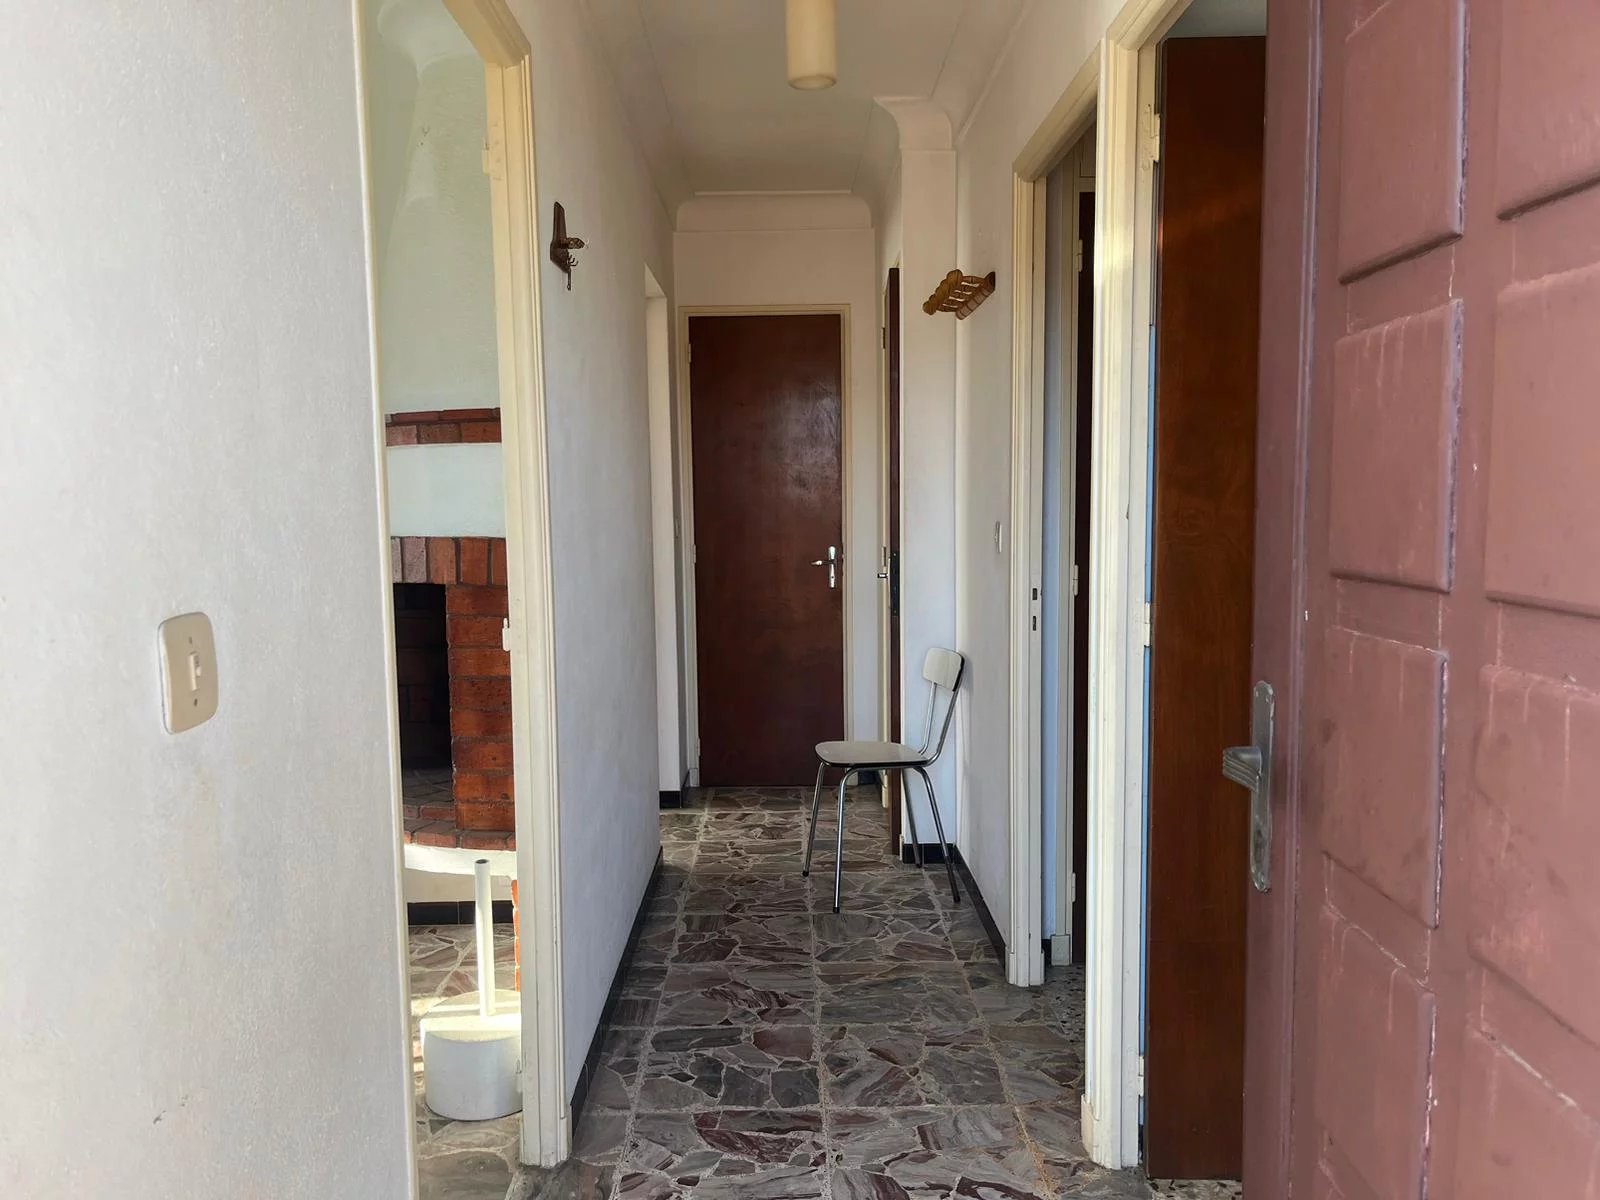 Ste.Maxime - 2/1 detached house with 2 flats in city centre